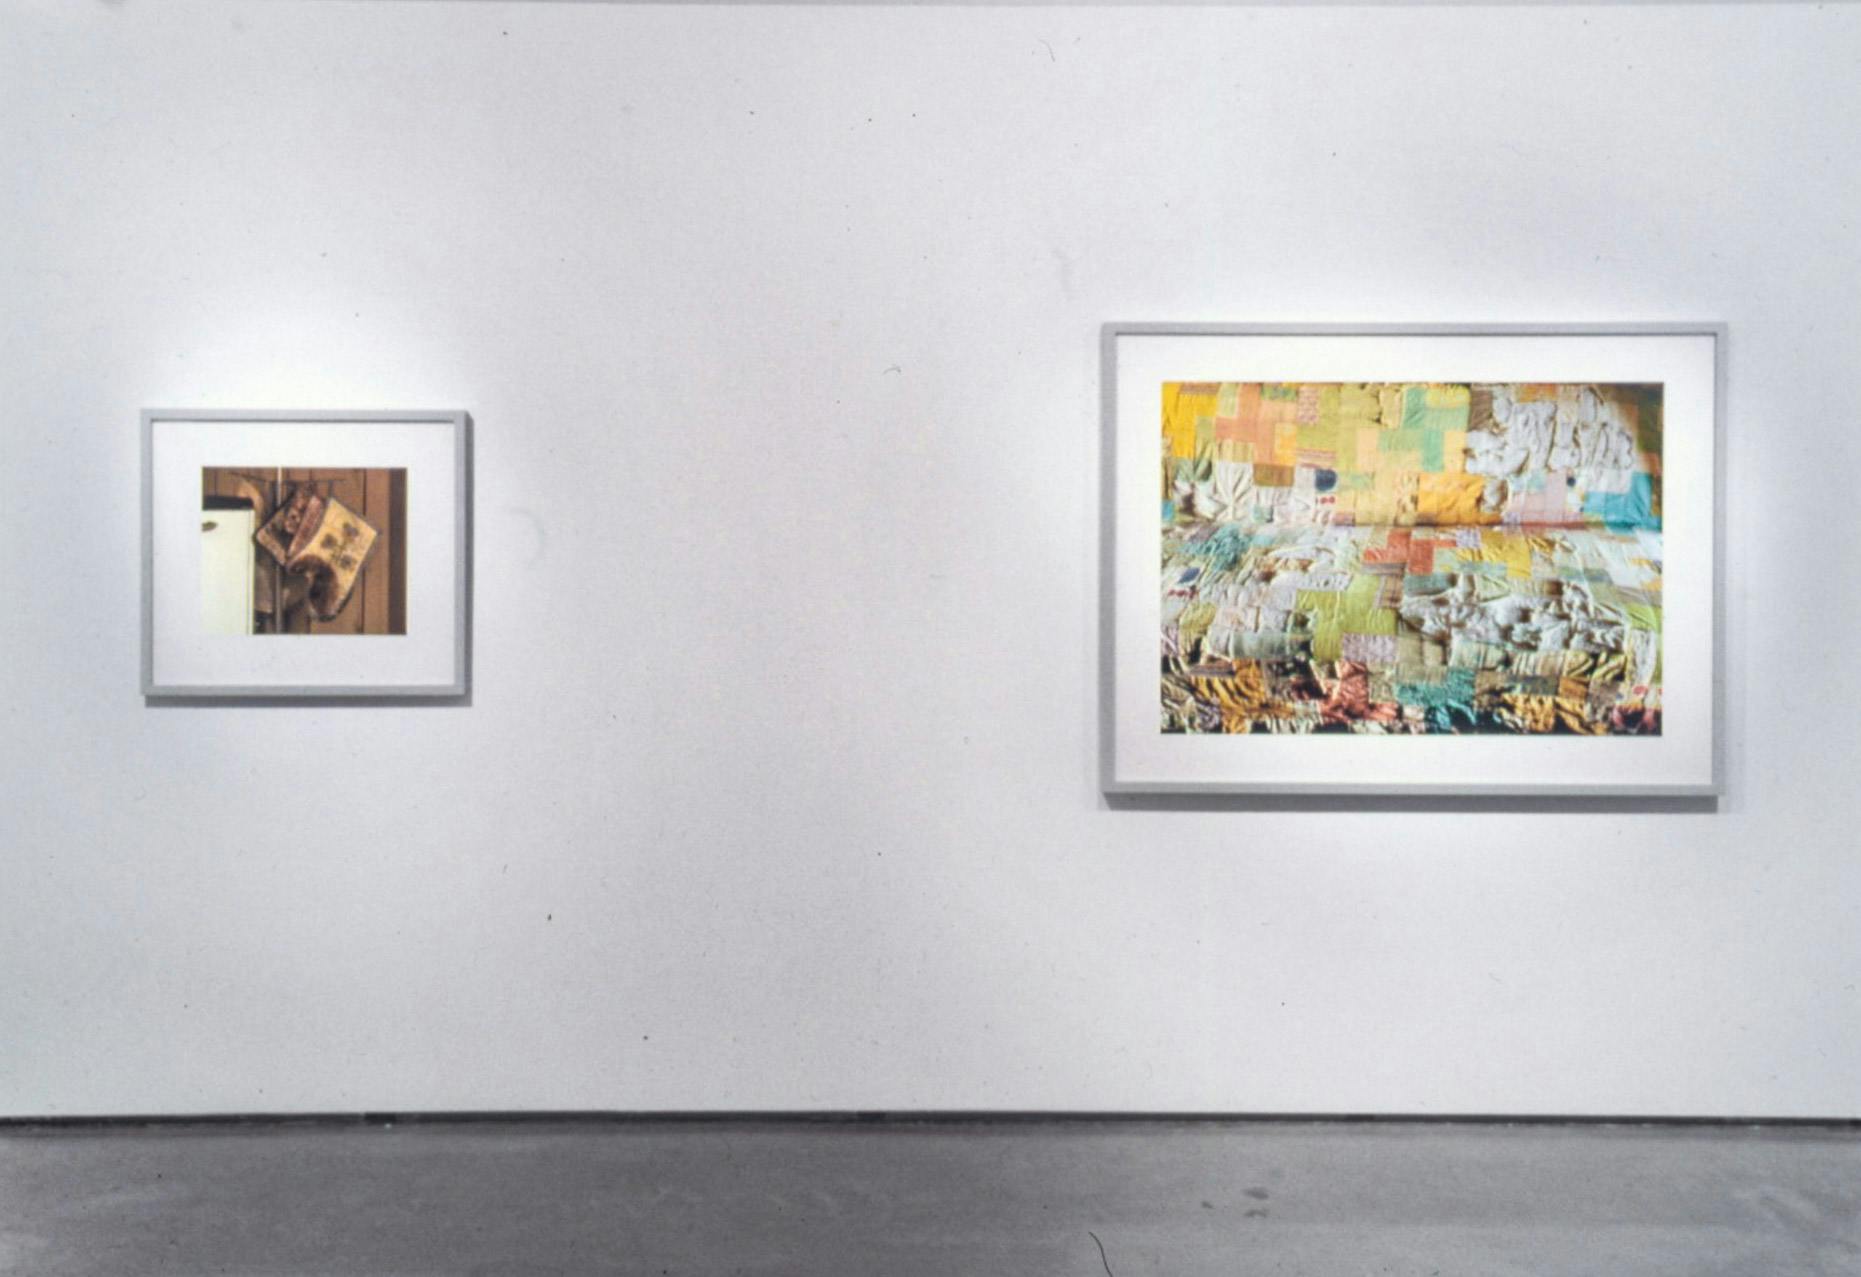 Two photographs are installed on the gallery walls. The photograph on the left depicts cooking mittens. The large photograph on the right depicts a surface of a piece of colourful quilt work. 